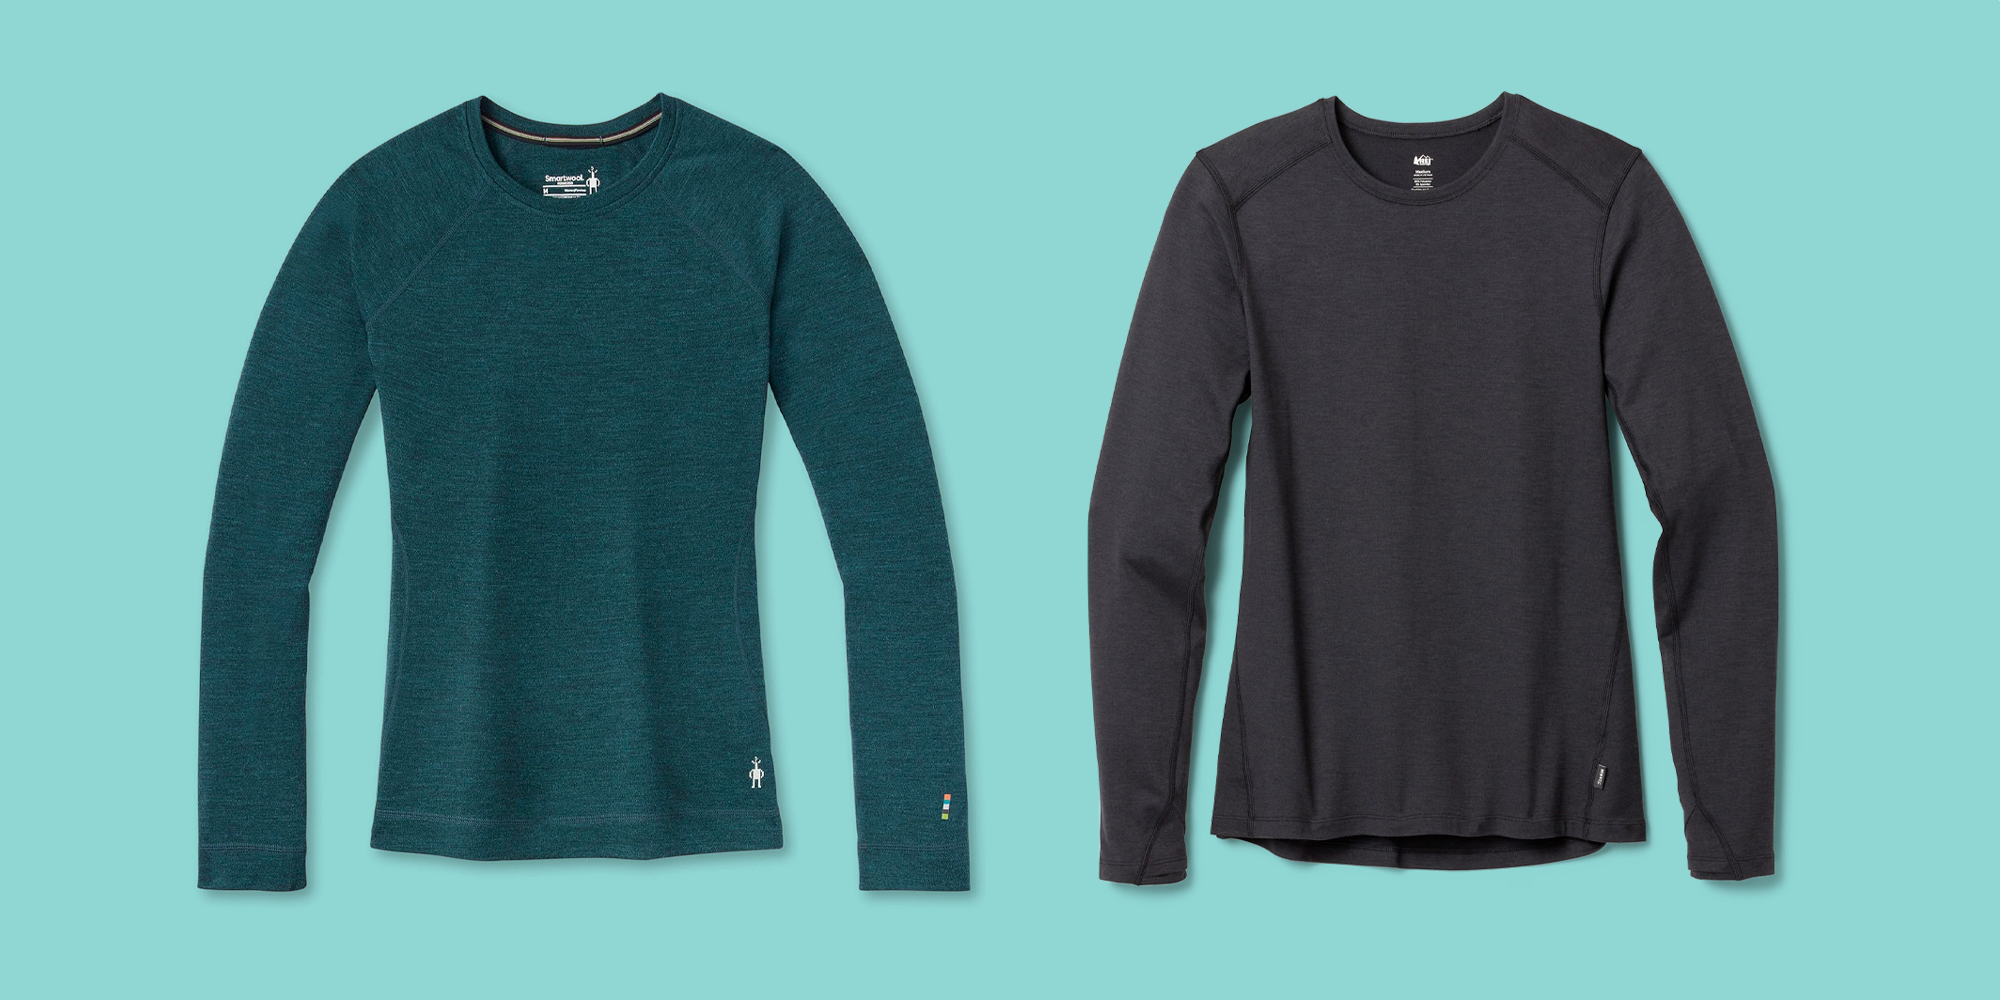 Best Winter Thermals to Keep You Warm in 2021